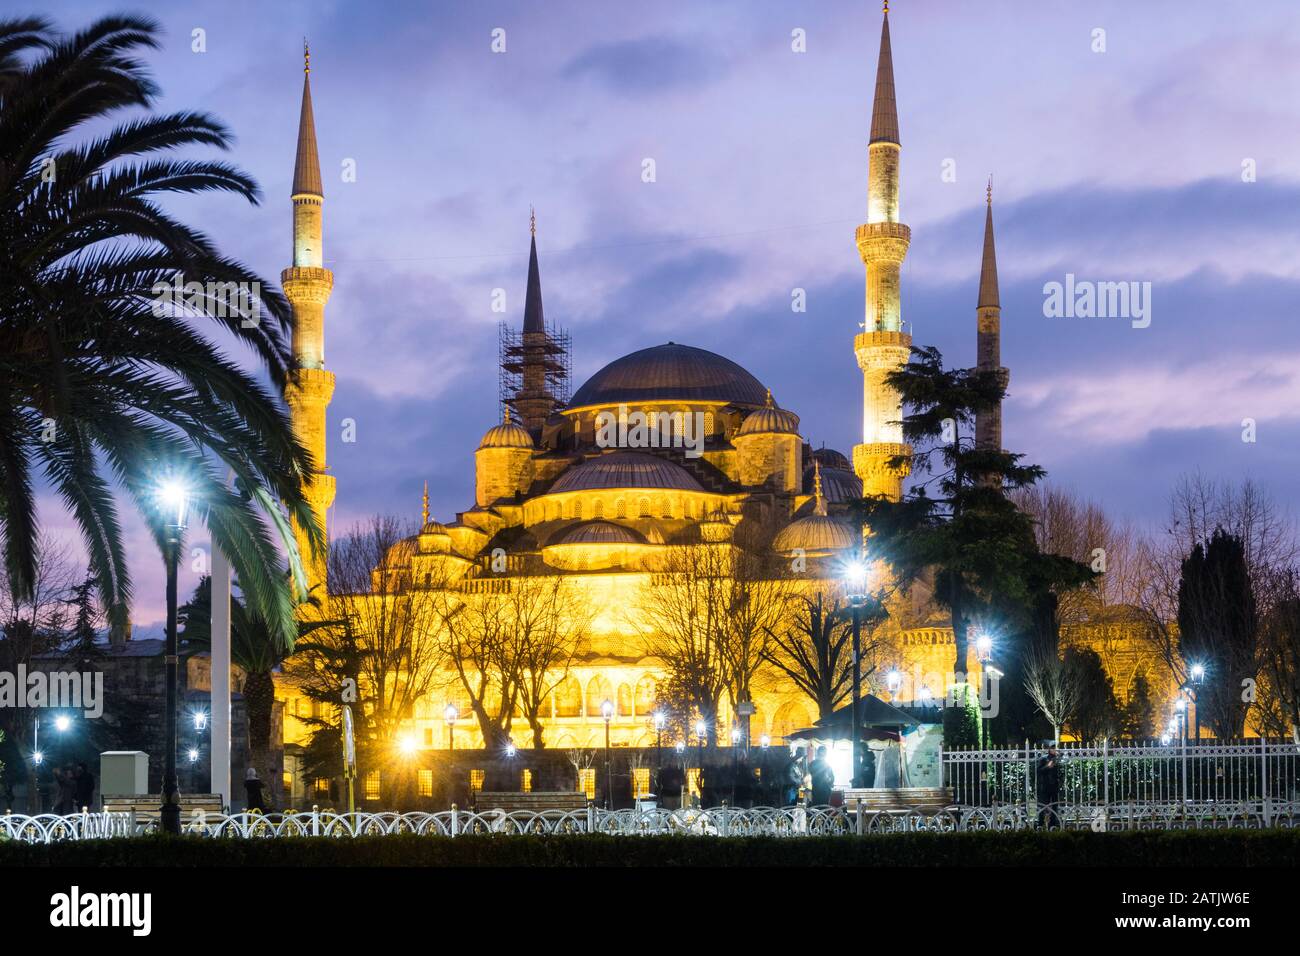 Istanbul, Turkey - Jan 9, 2020: The Sultanahmet District and the Blue Mosque in Istanbul, Turkey Stock Photo